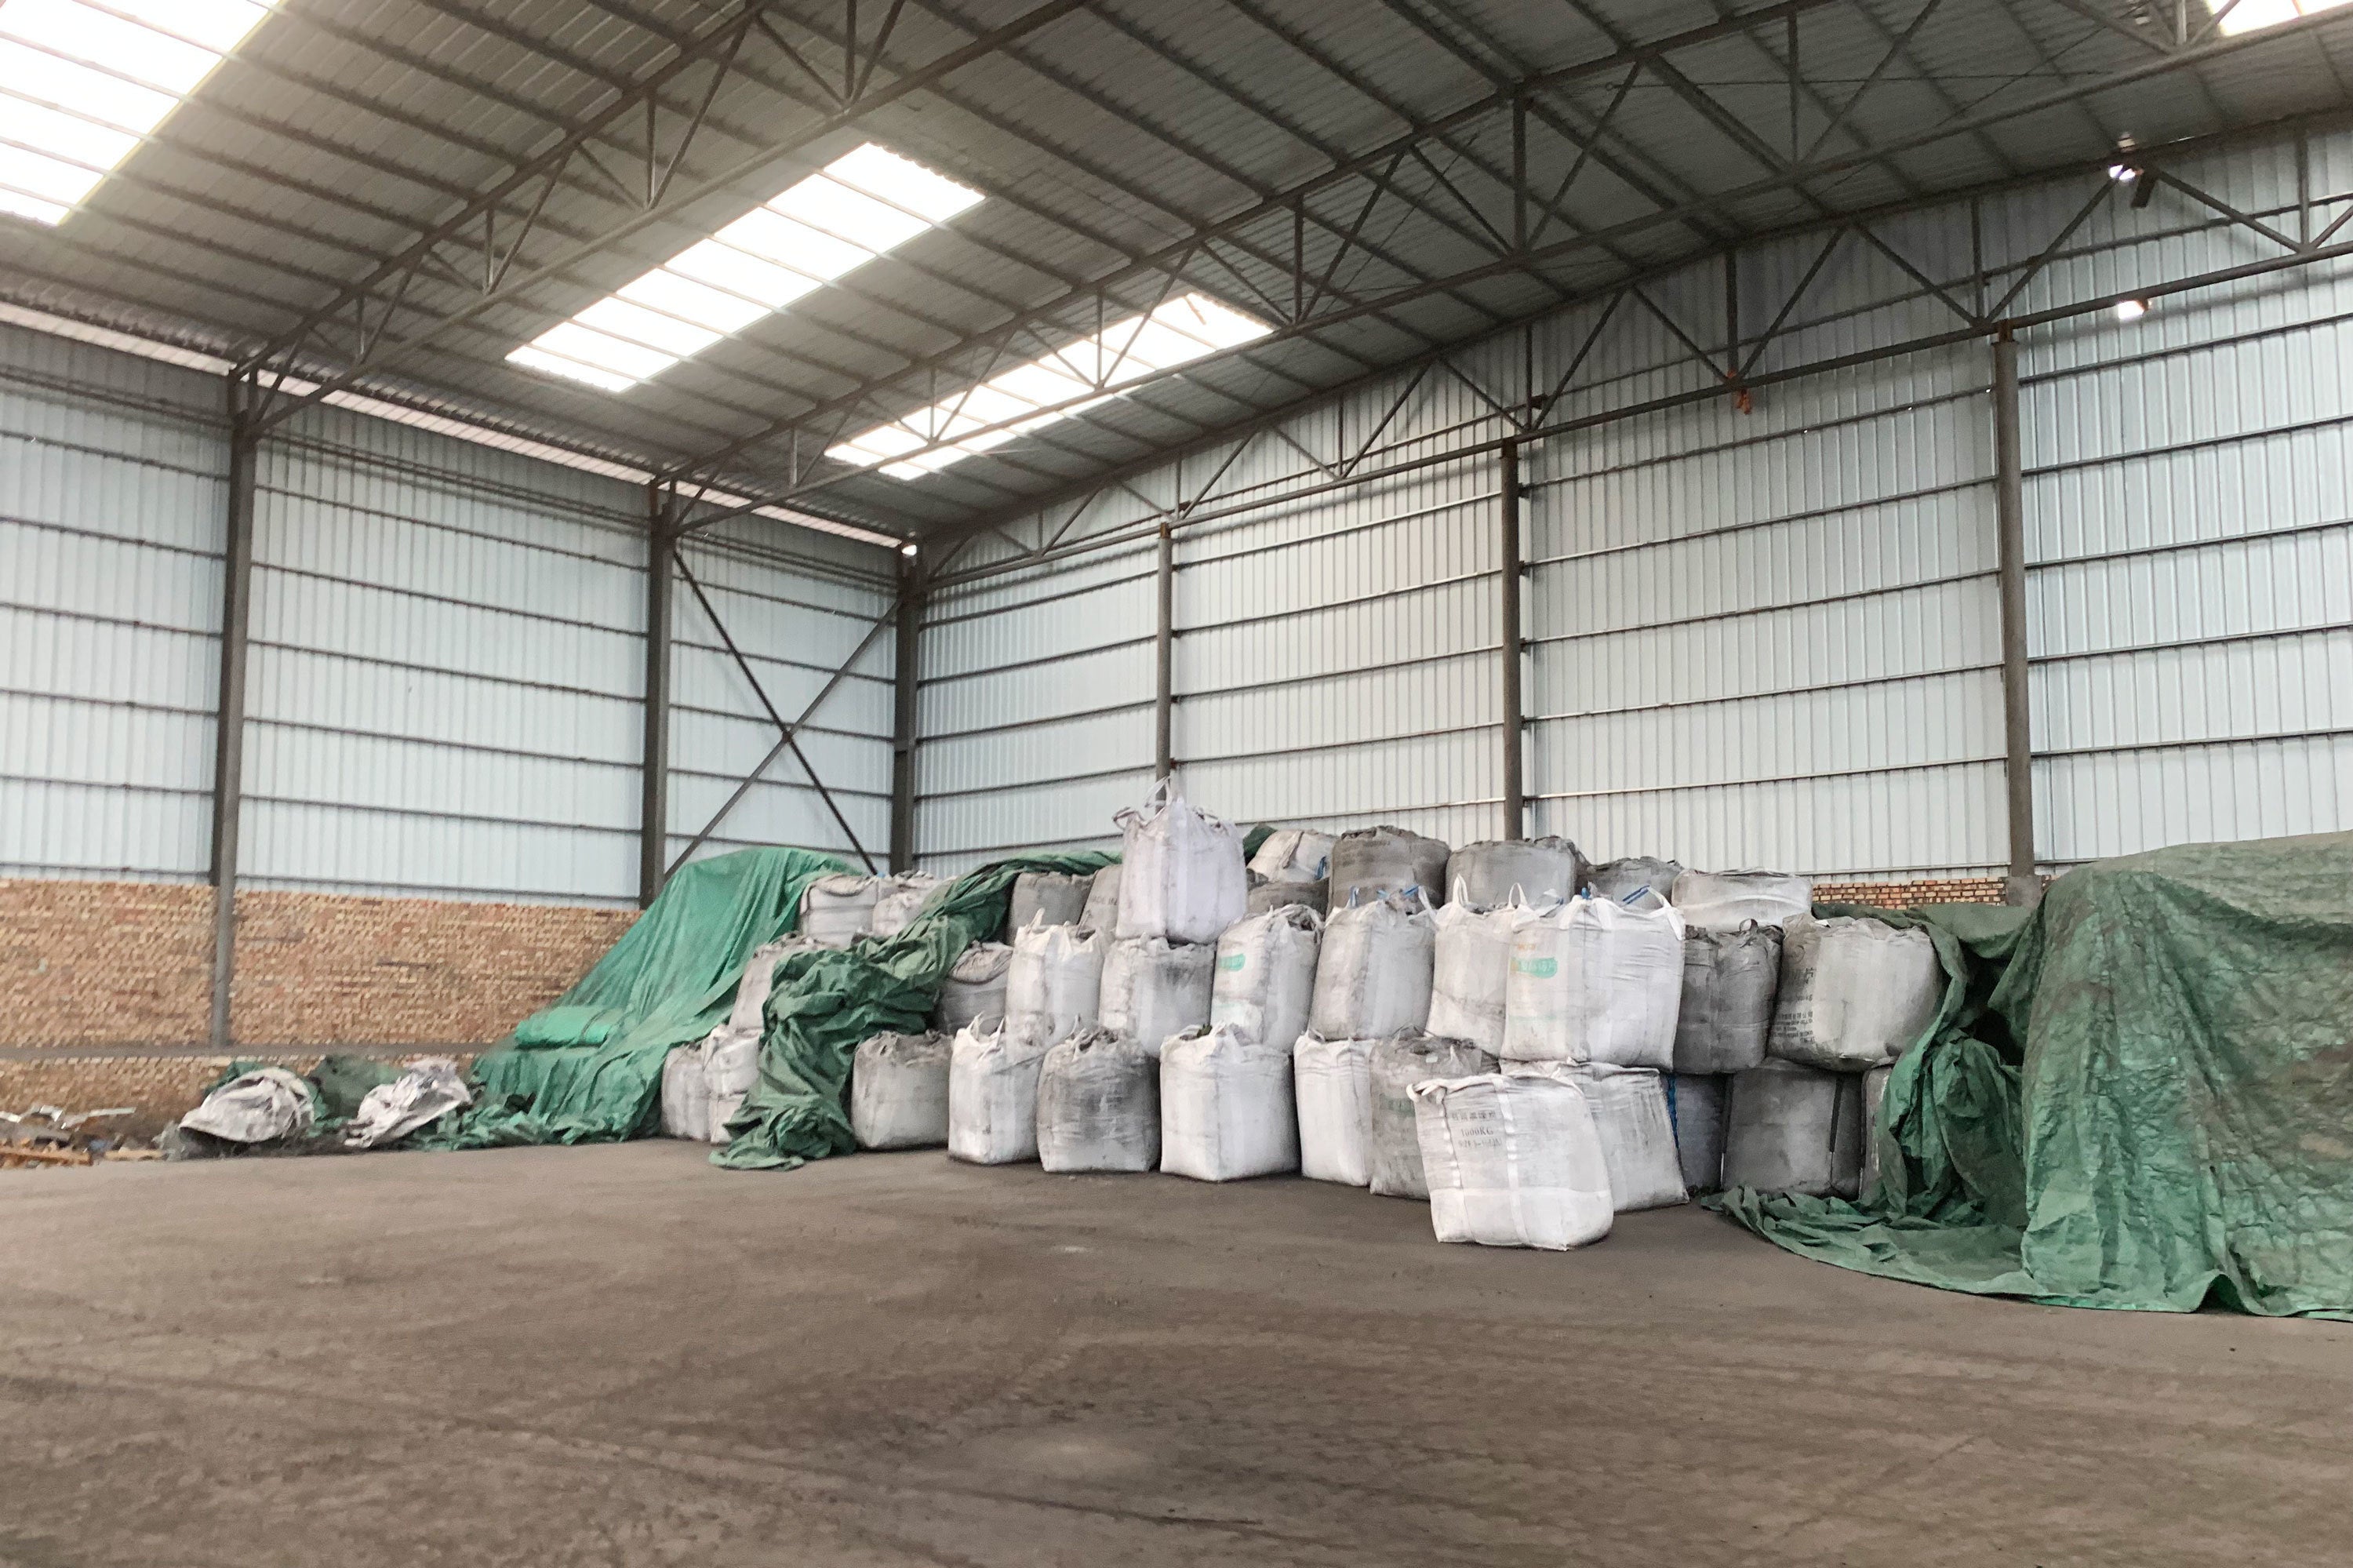 Sacks of coal byproducts await sale at a manufacturing site in northwestern China's Ningxia region, where Benjamin Chen works as a salesperson. 